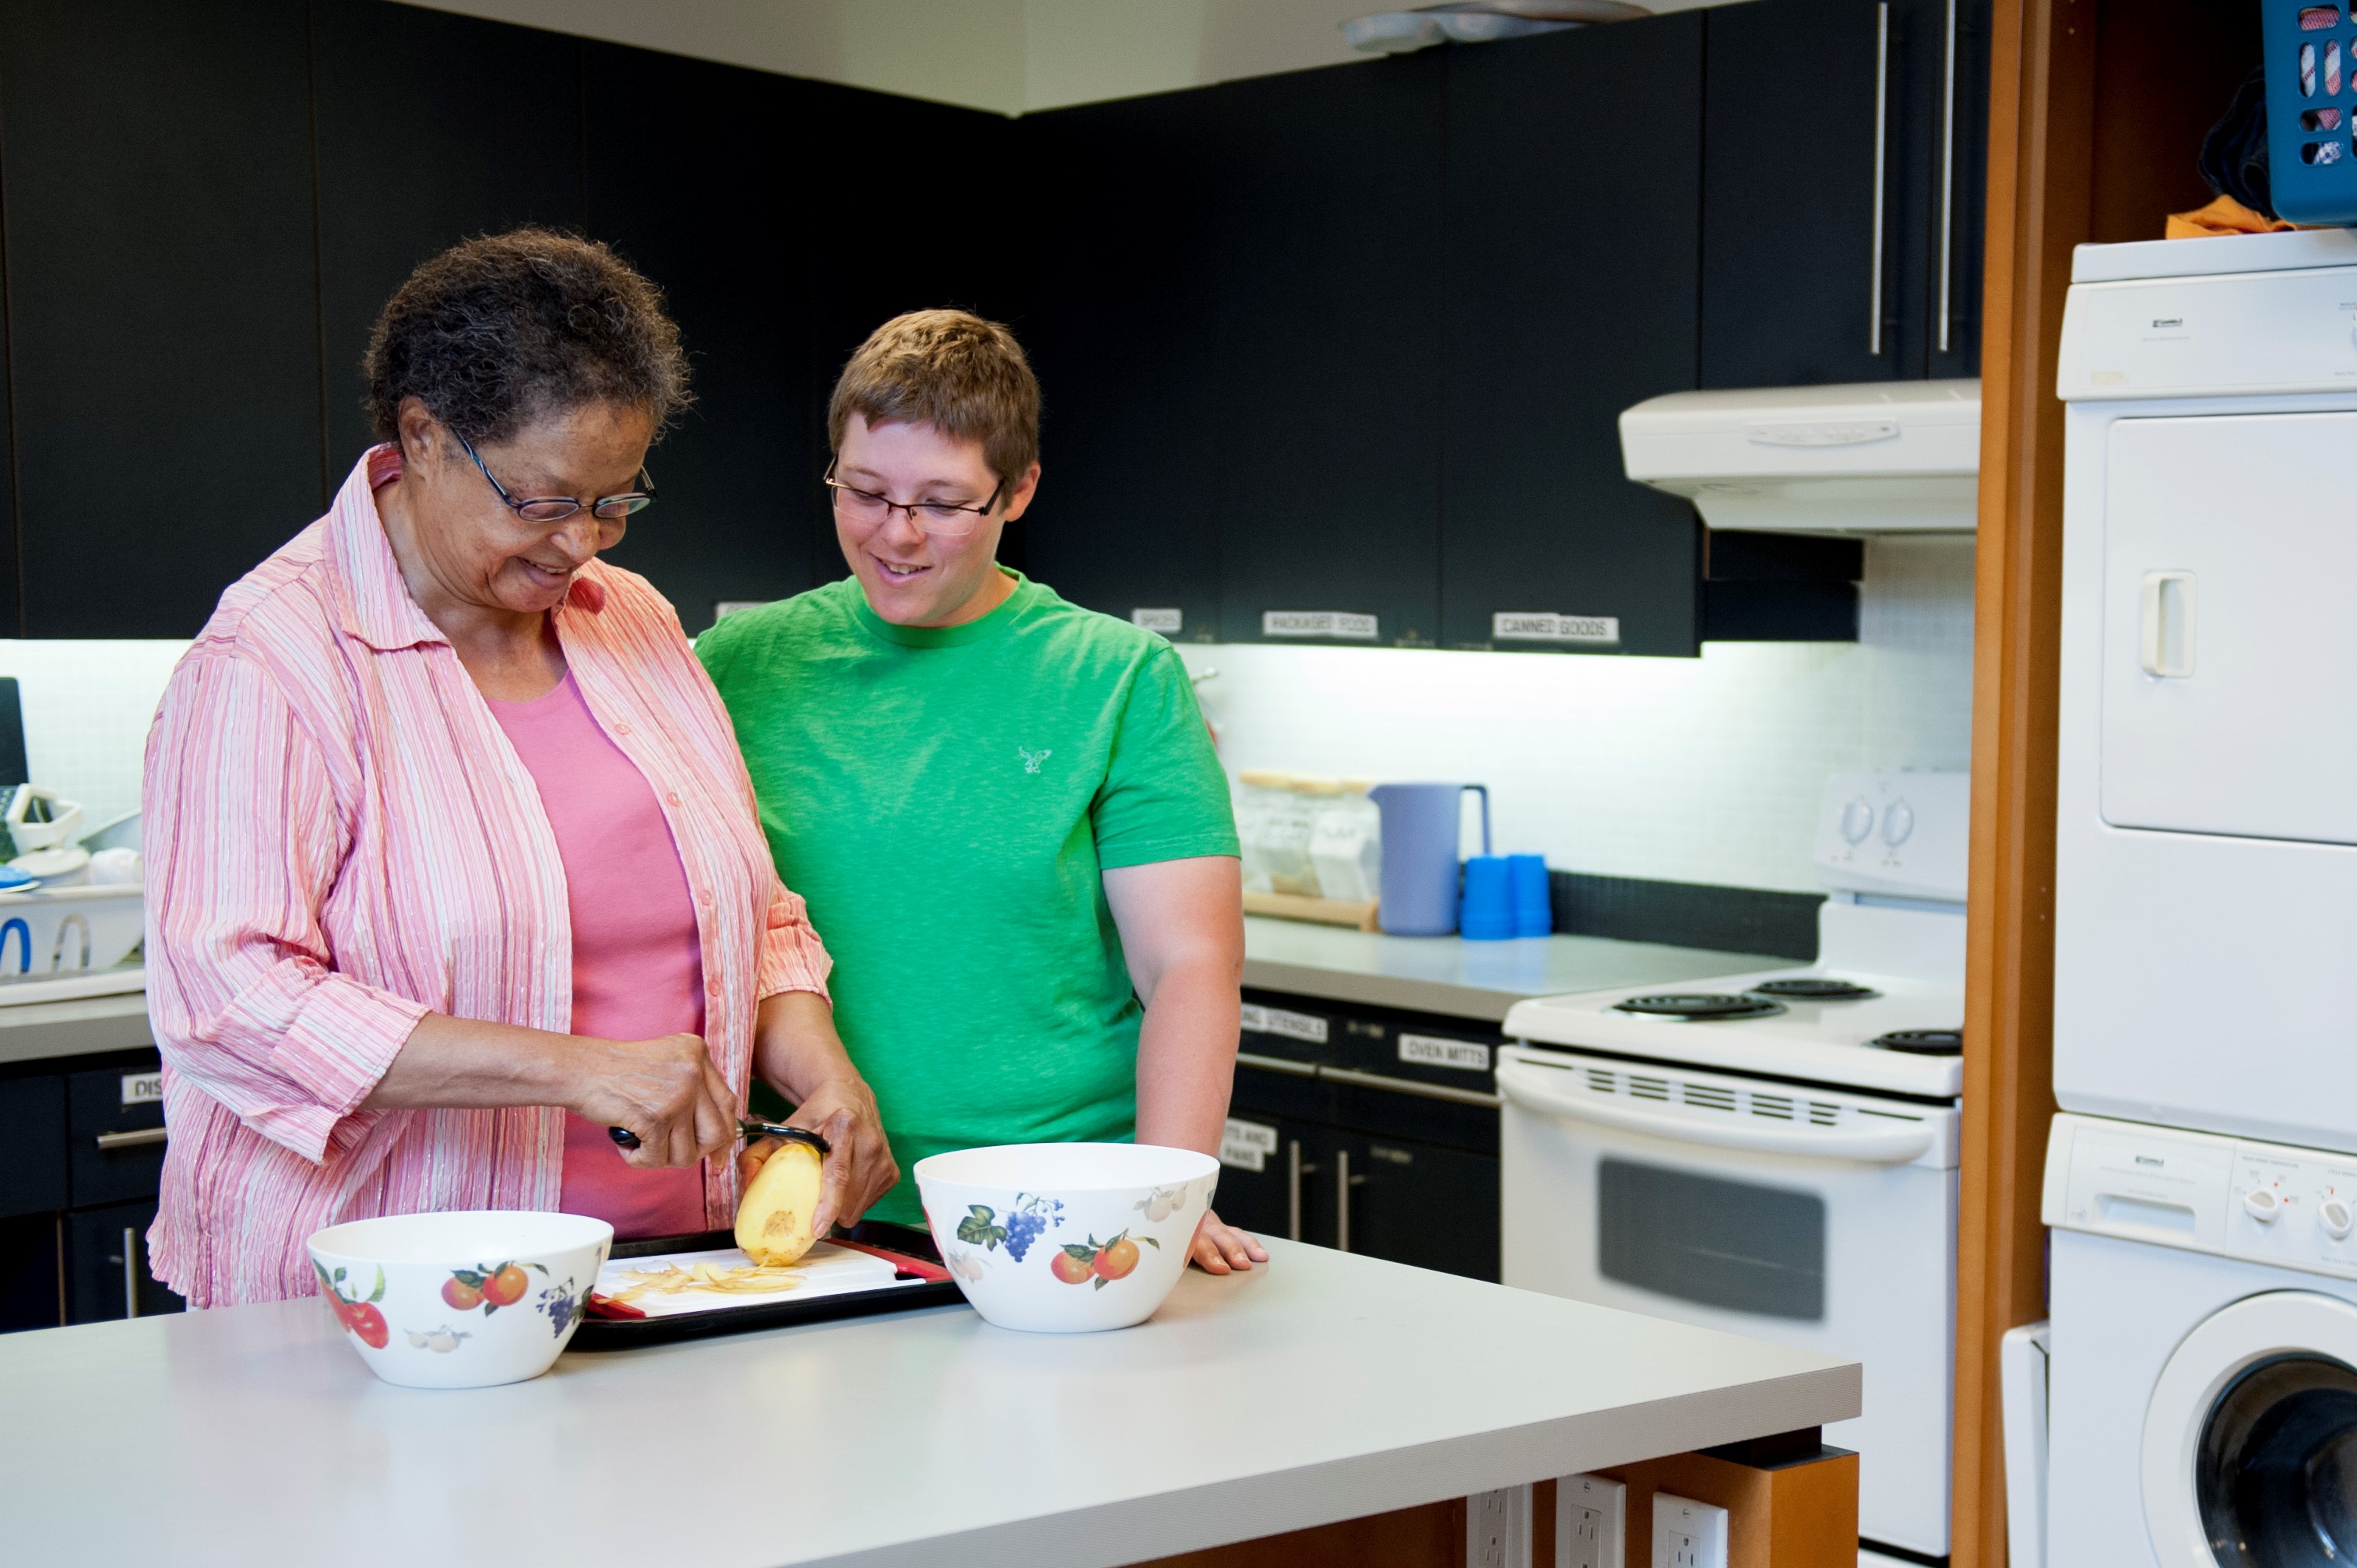 Younger woman watches older woman chop vegetables in kitchen, both smiling 